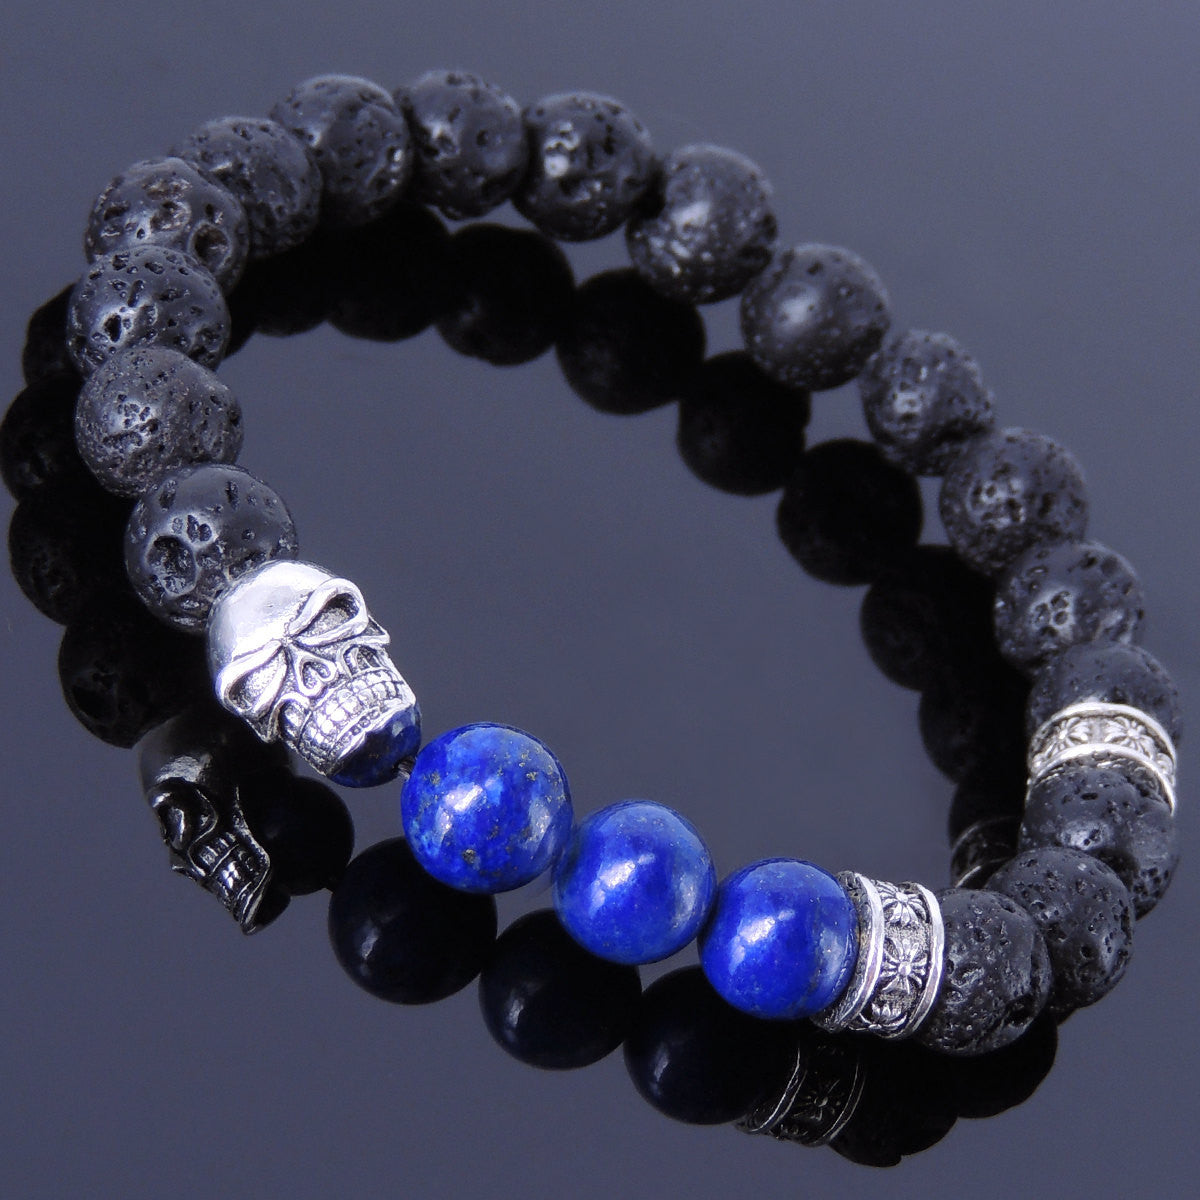 Lapis Lazuli & Lava Rock Healing Gemstone Bracelet with S925 Sterling Silver Protection Skull Bead & Cross Spacers - Handmade by Gem & Silver BR341